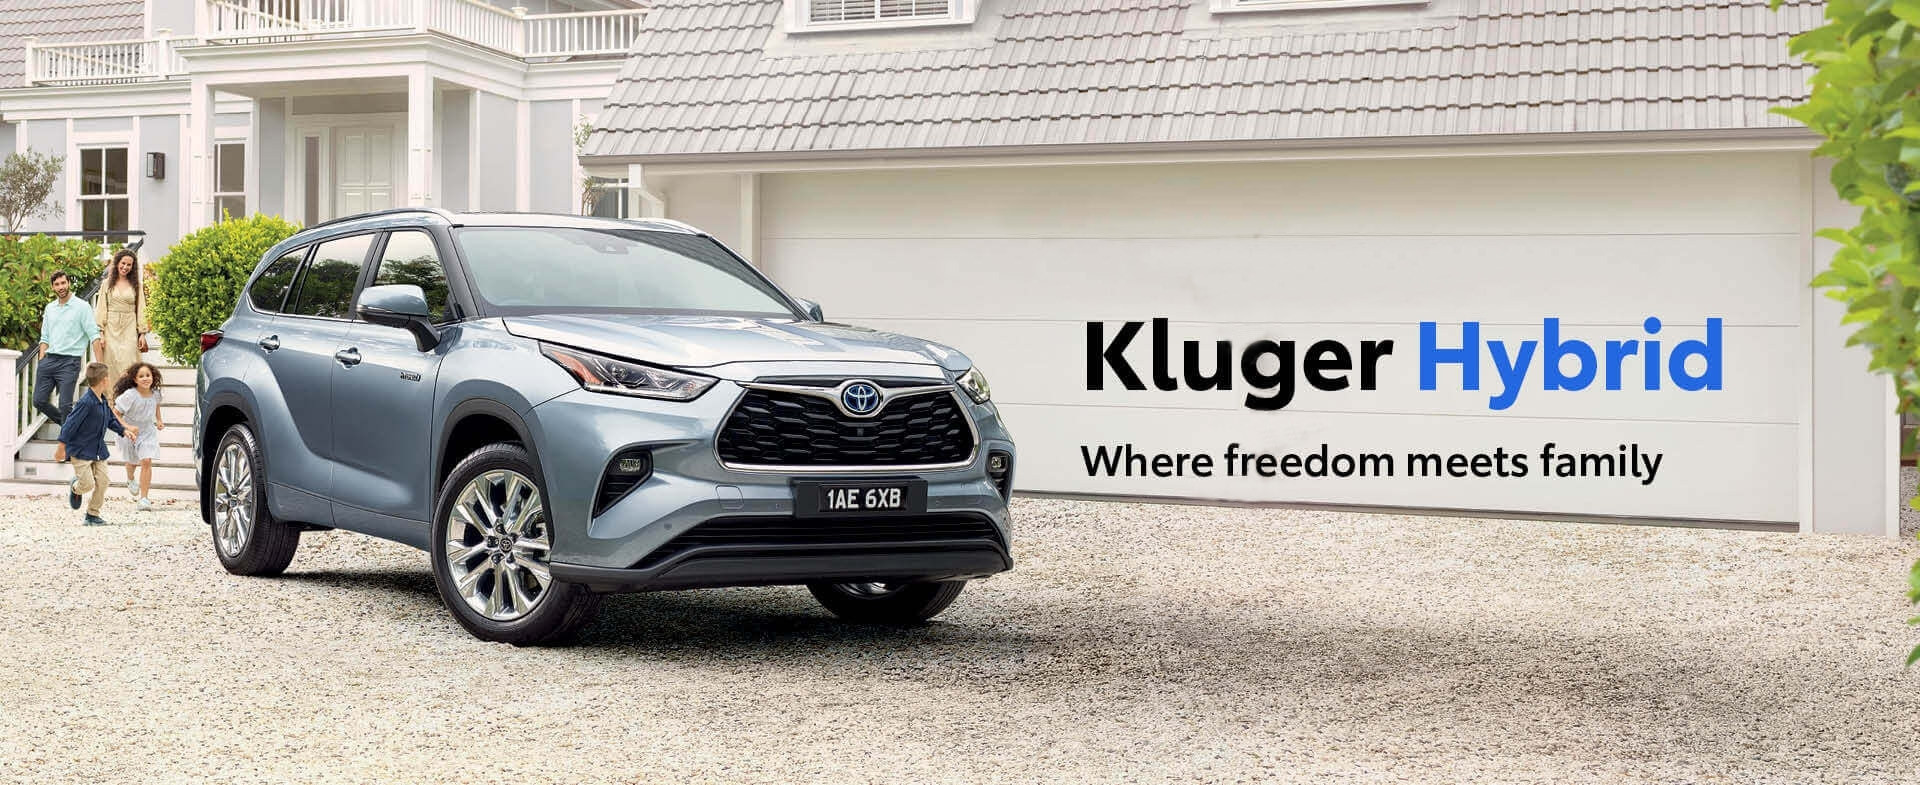 Kluger Hybrid - Where freedom meets family